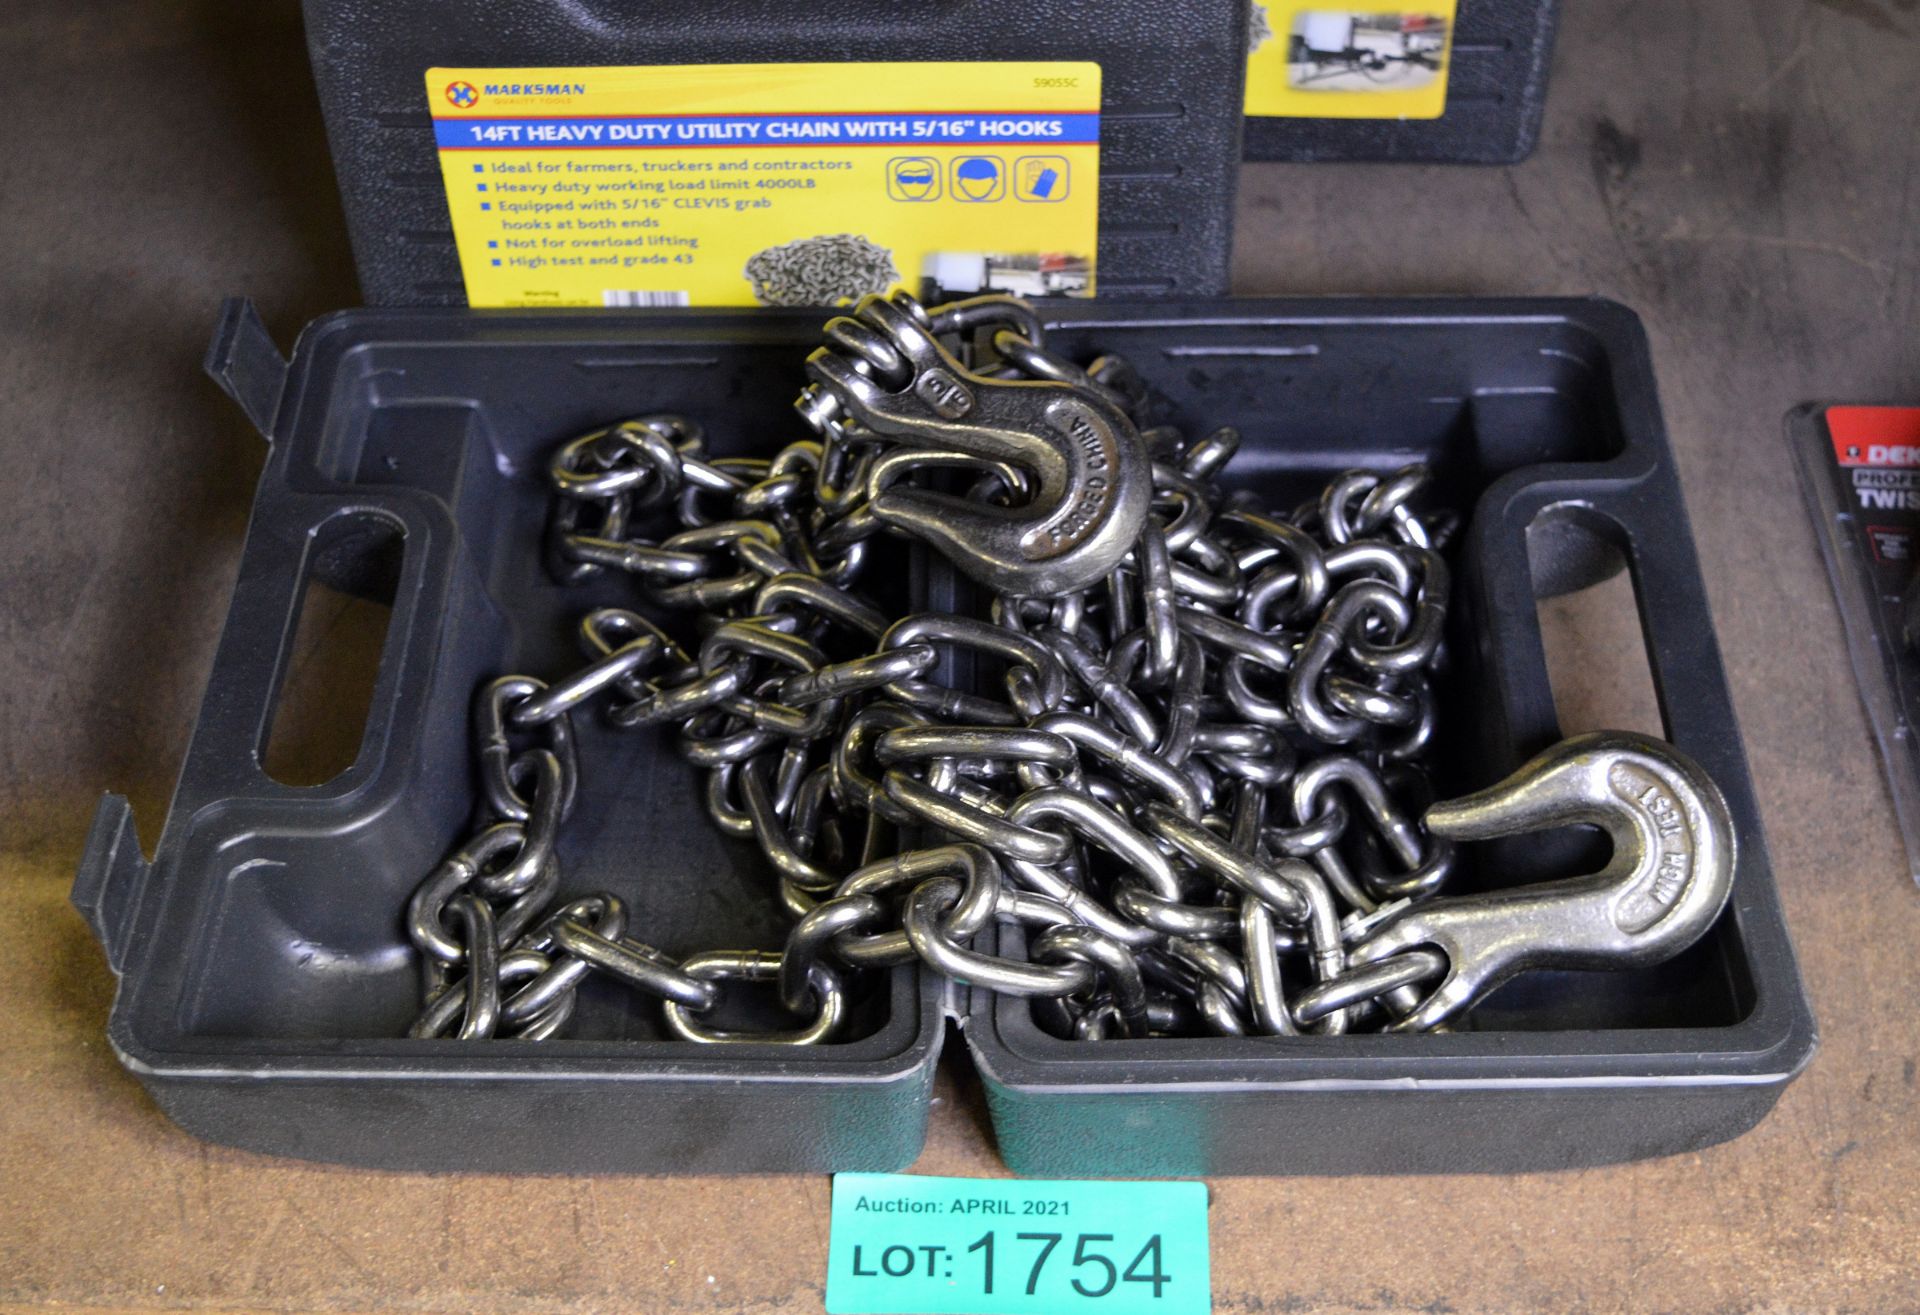 3x Marksman 14ft heavy duty utility chain with 5/16 inch hooks - Image 2 of 2